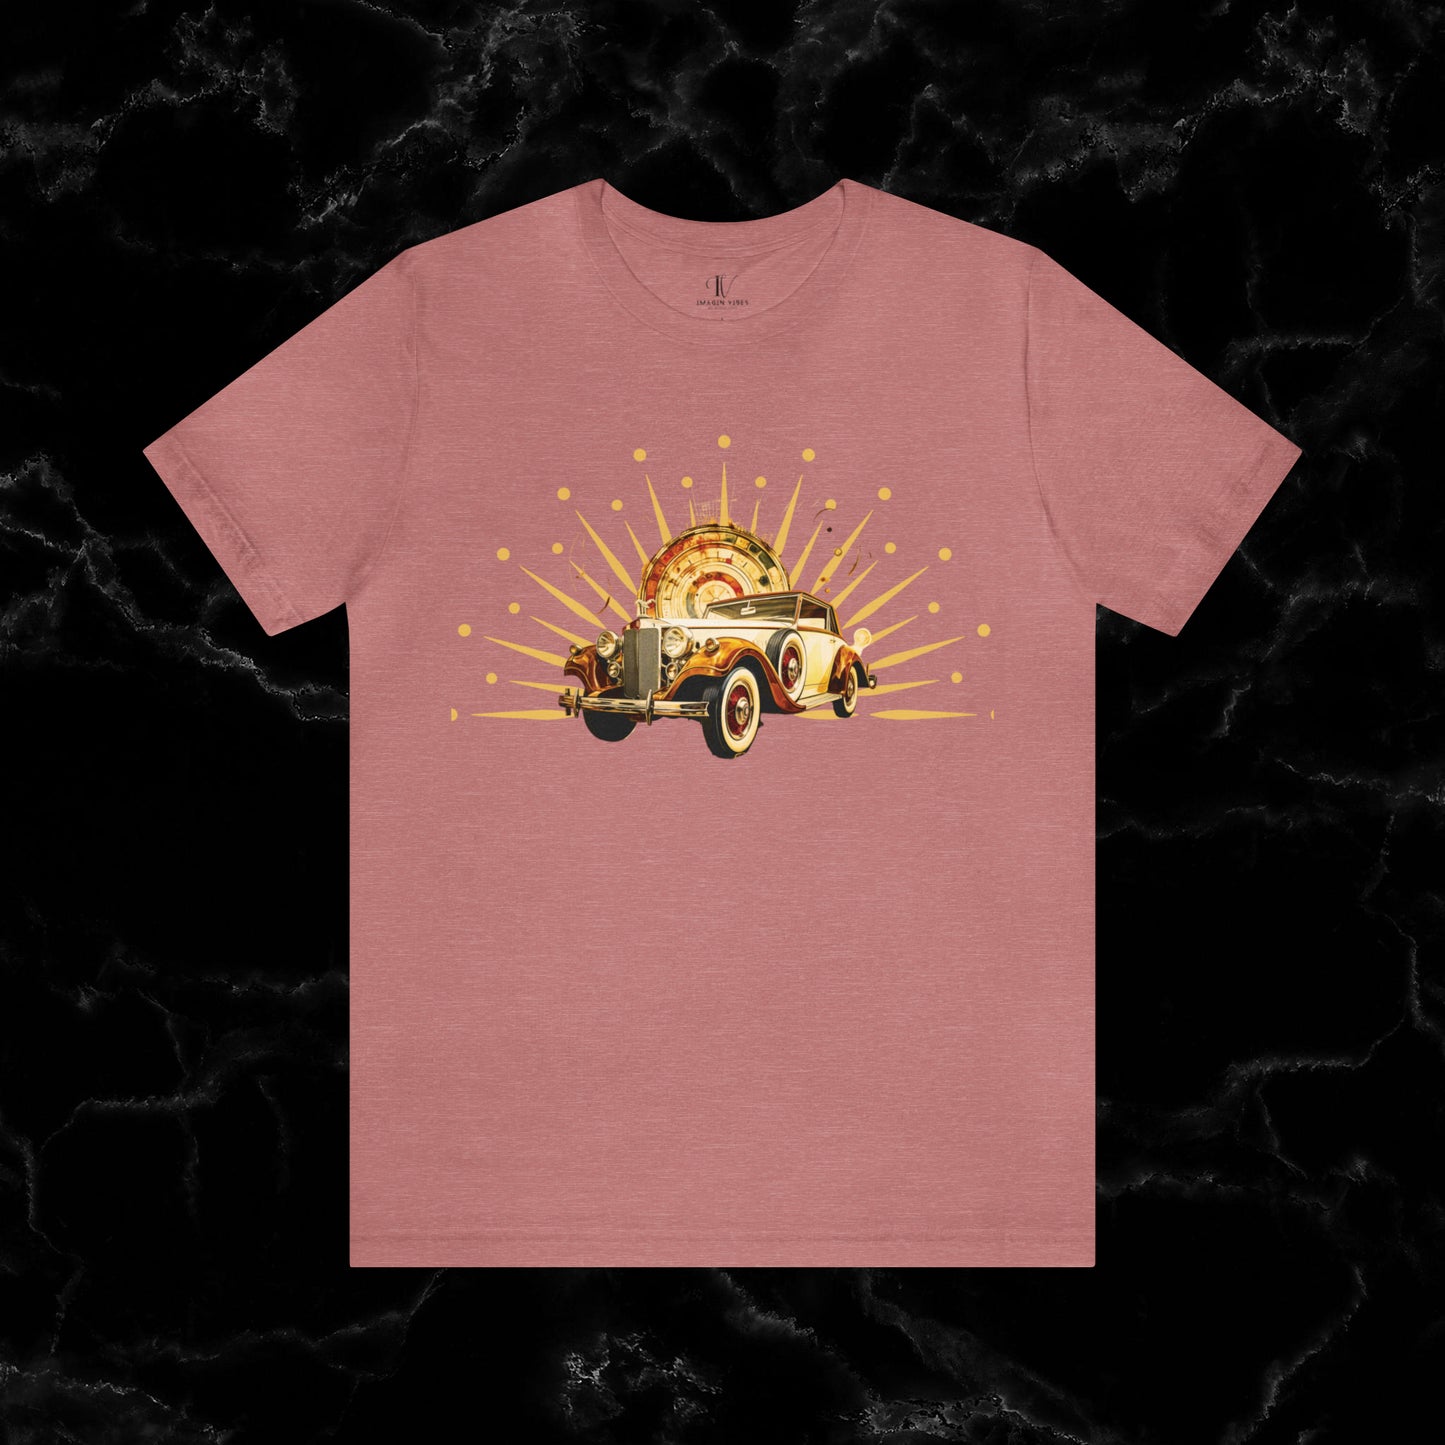 Vintage Car Enthusiast T-Shirt with Classic Wheels and Timeless Appeal Nostalgic T-Shirt Heather Mauve S 